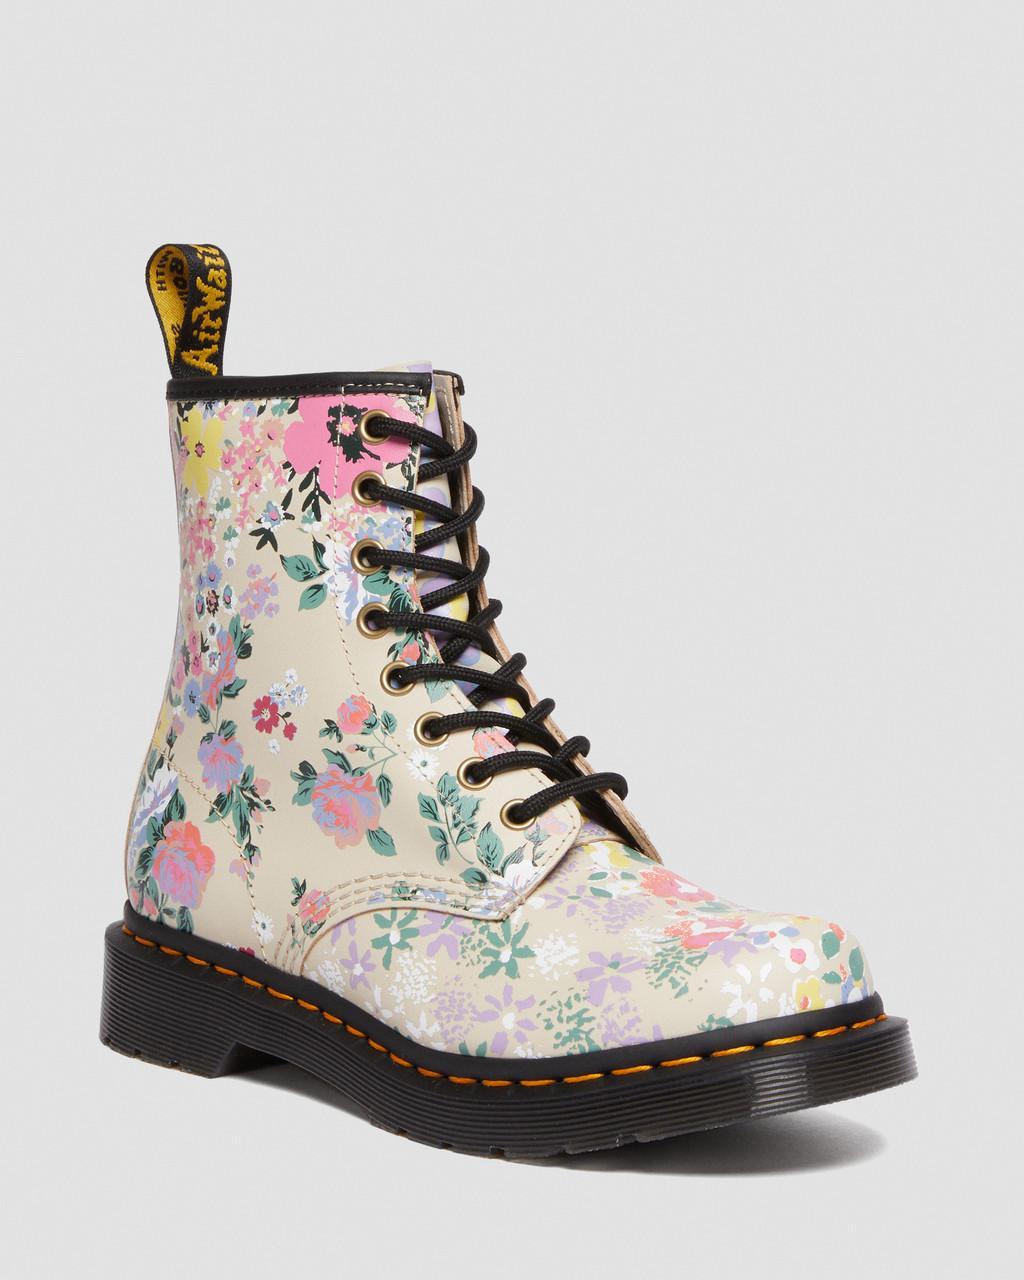 Dr. Martens 1460 Floral Mash Up Leather Lace Up Boots in White | Lyst